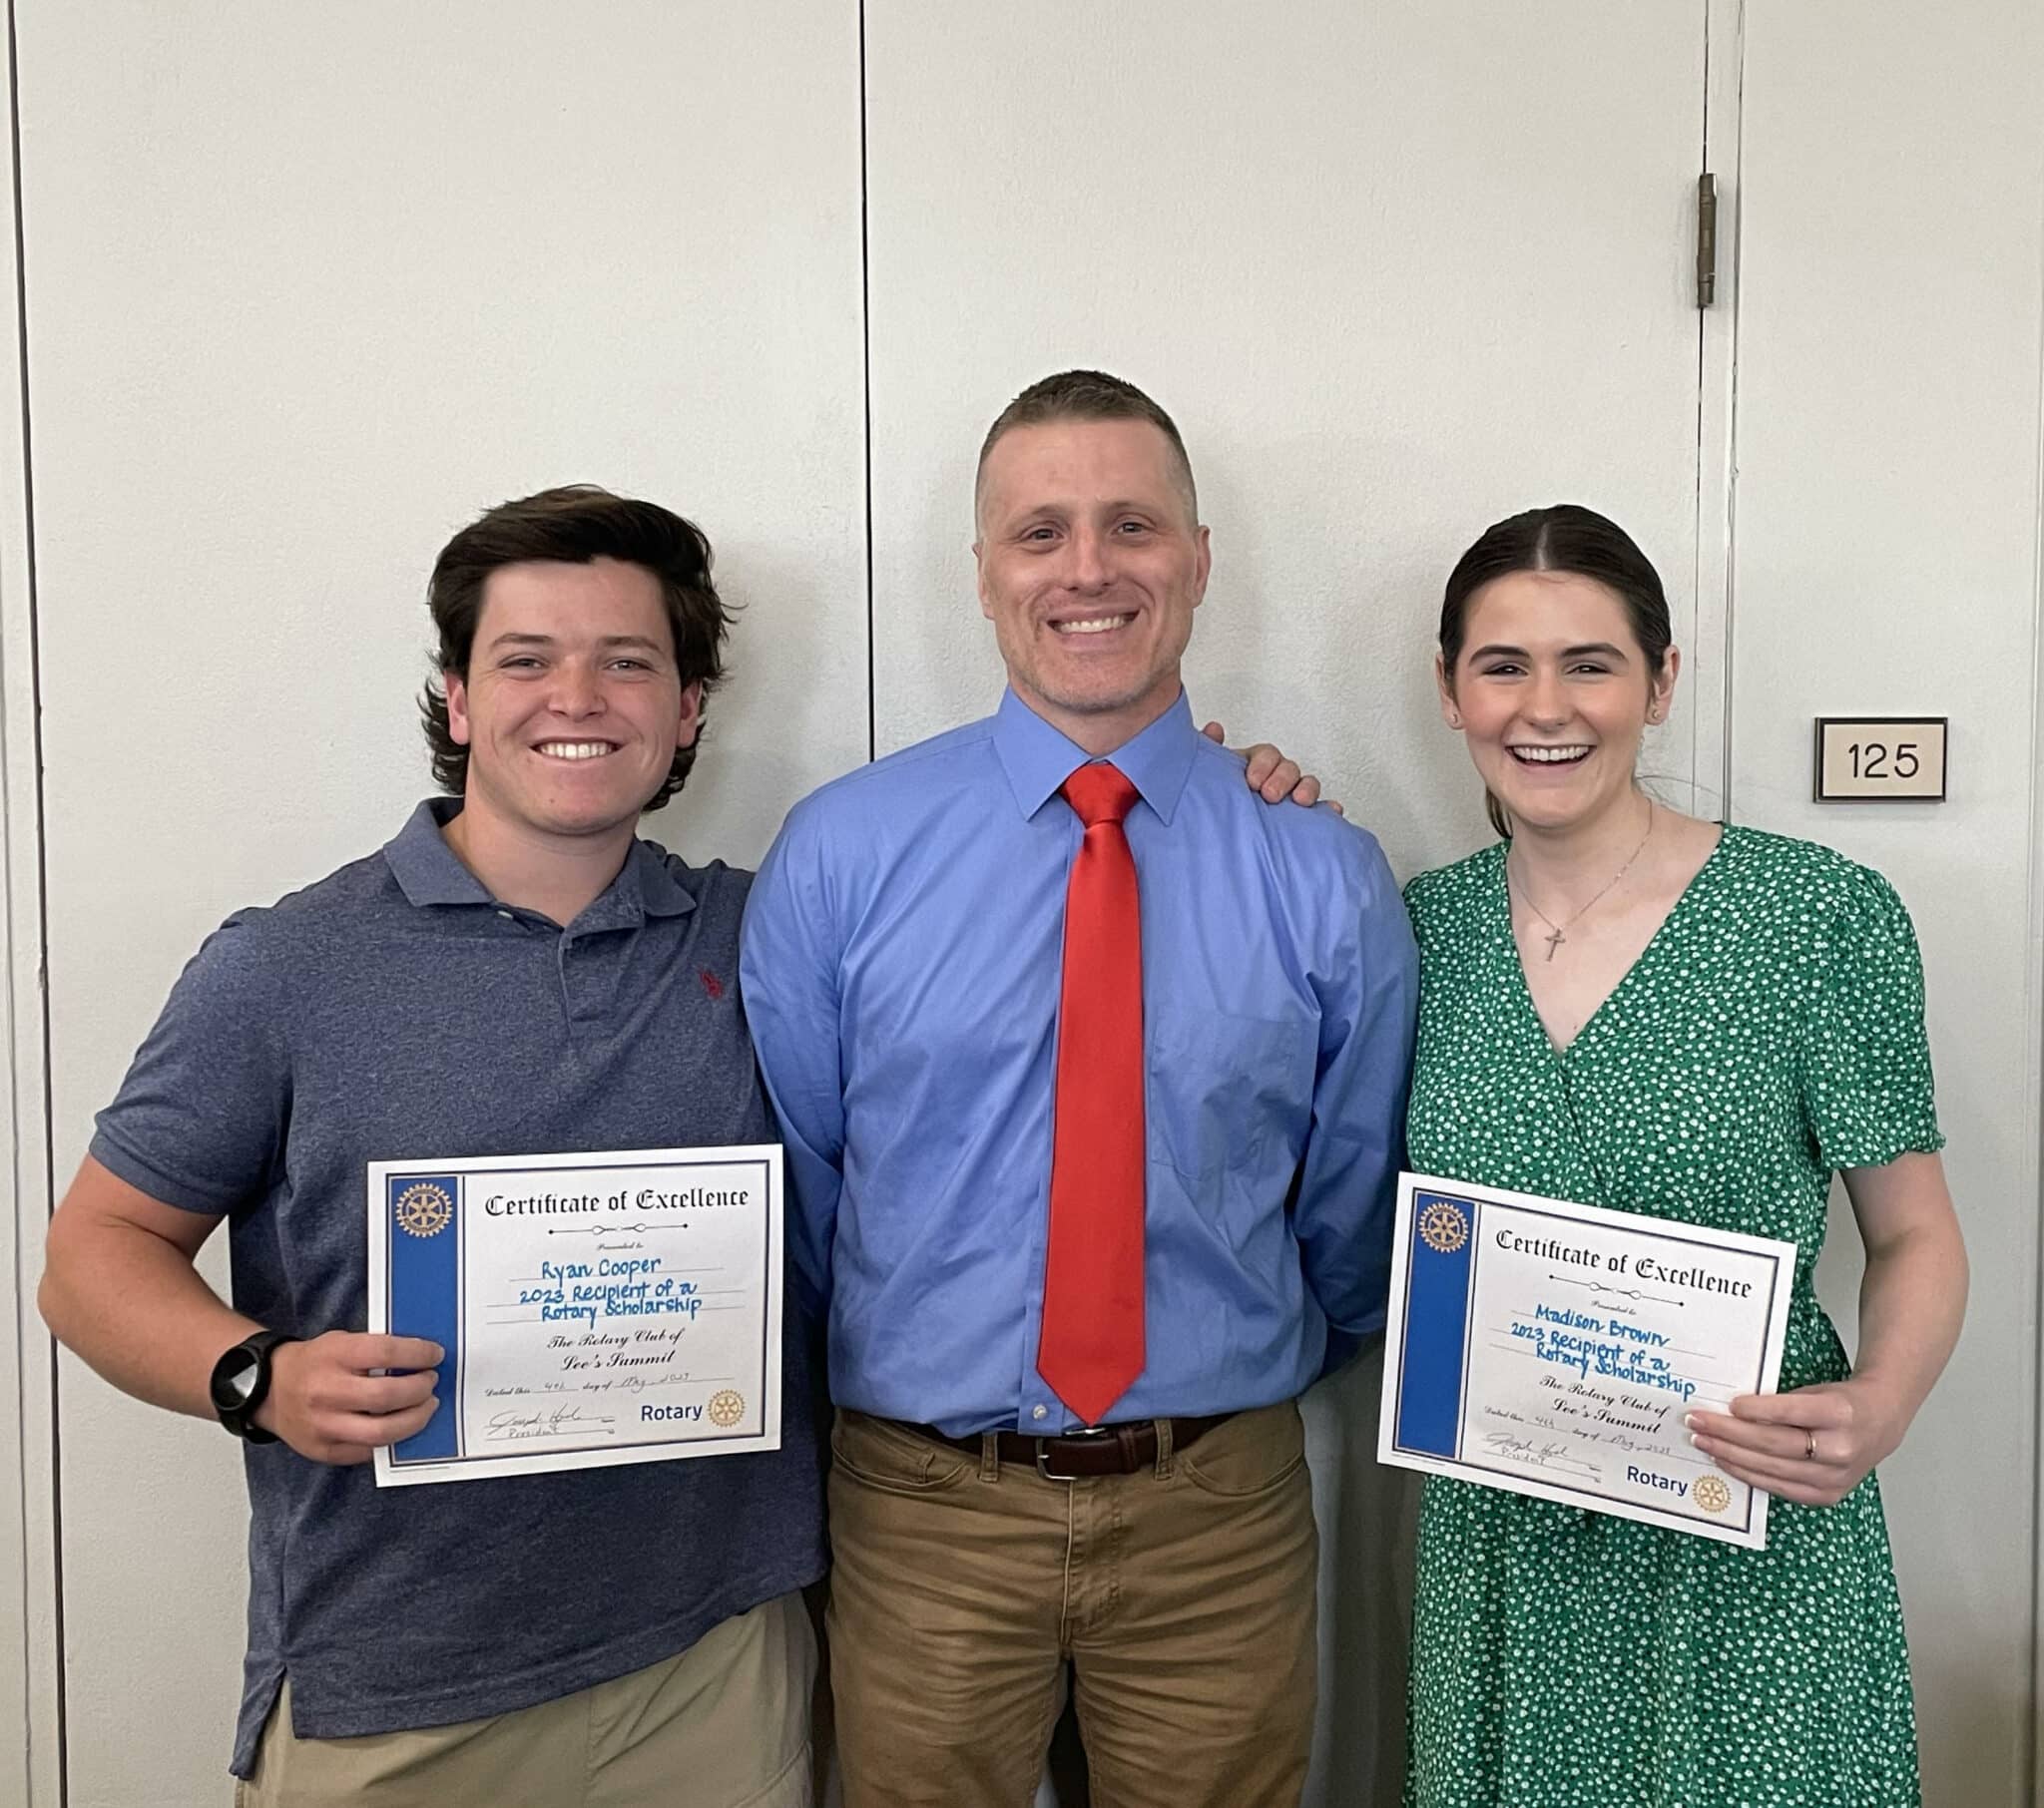 SCA Seniors Ryan Cooper (left) and Madison Brown (right), pictured with SCA College and Career Advisor Shaun Pfannenstiel, are the recipients of two Rotary Club of Lee’s Summit Scholarships.